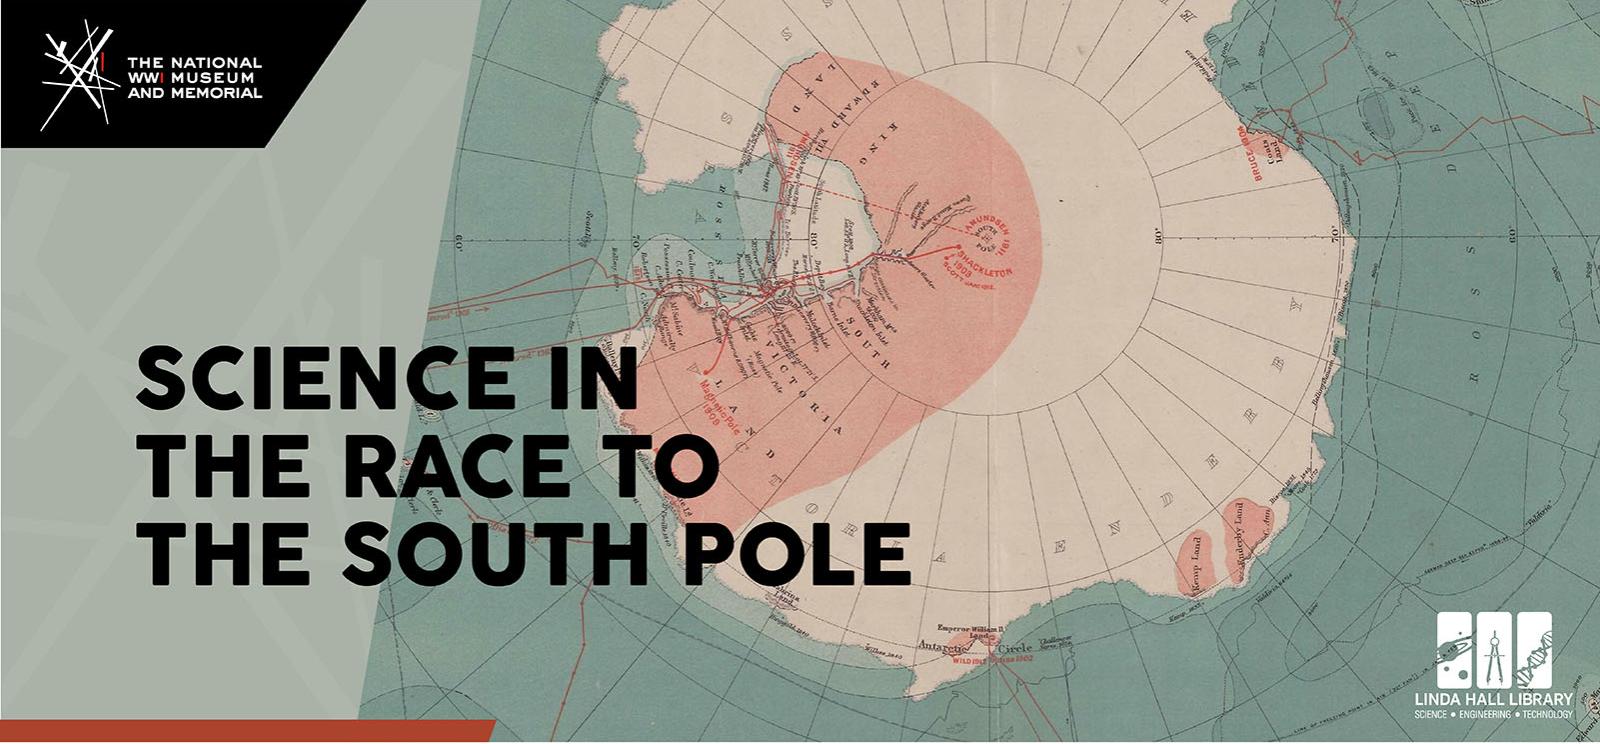 Image: Vintage map of Antarctica. Text: 'Science in the Race to the South Pole'